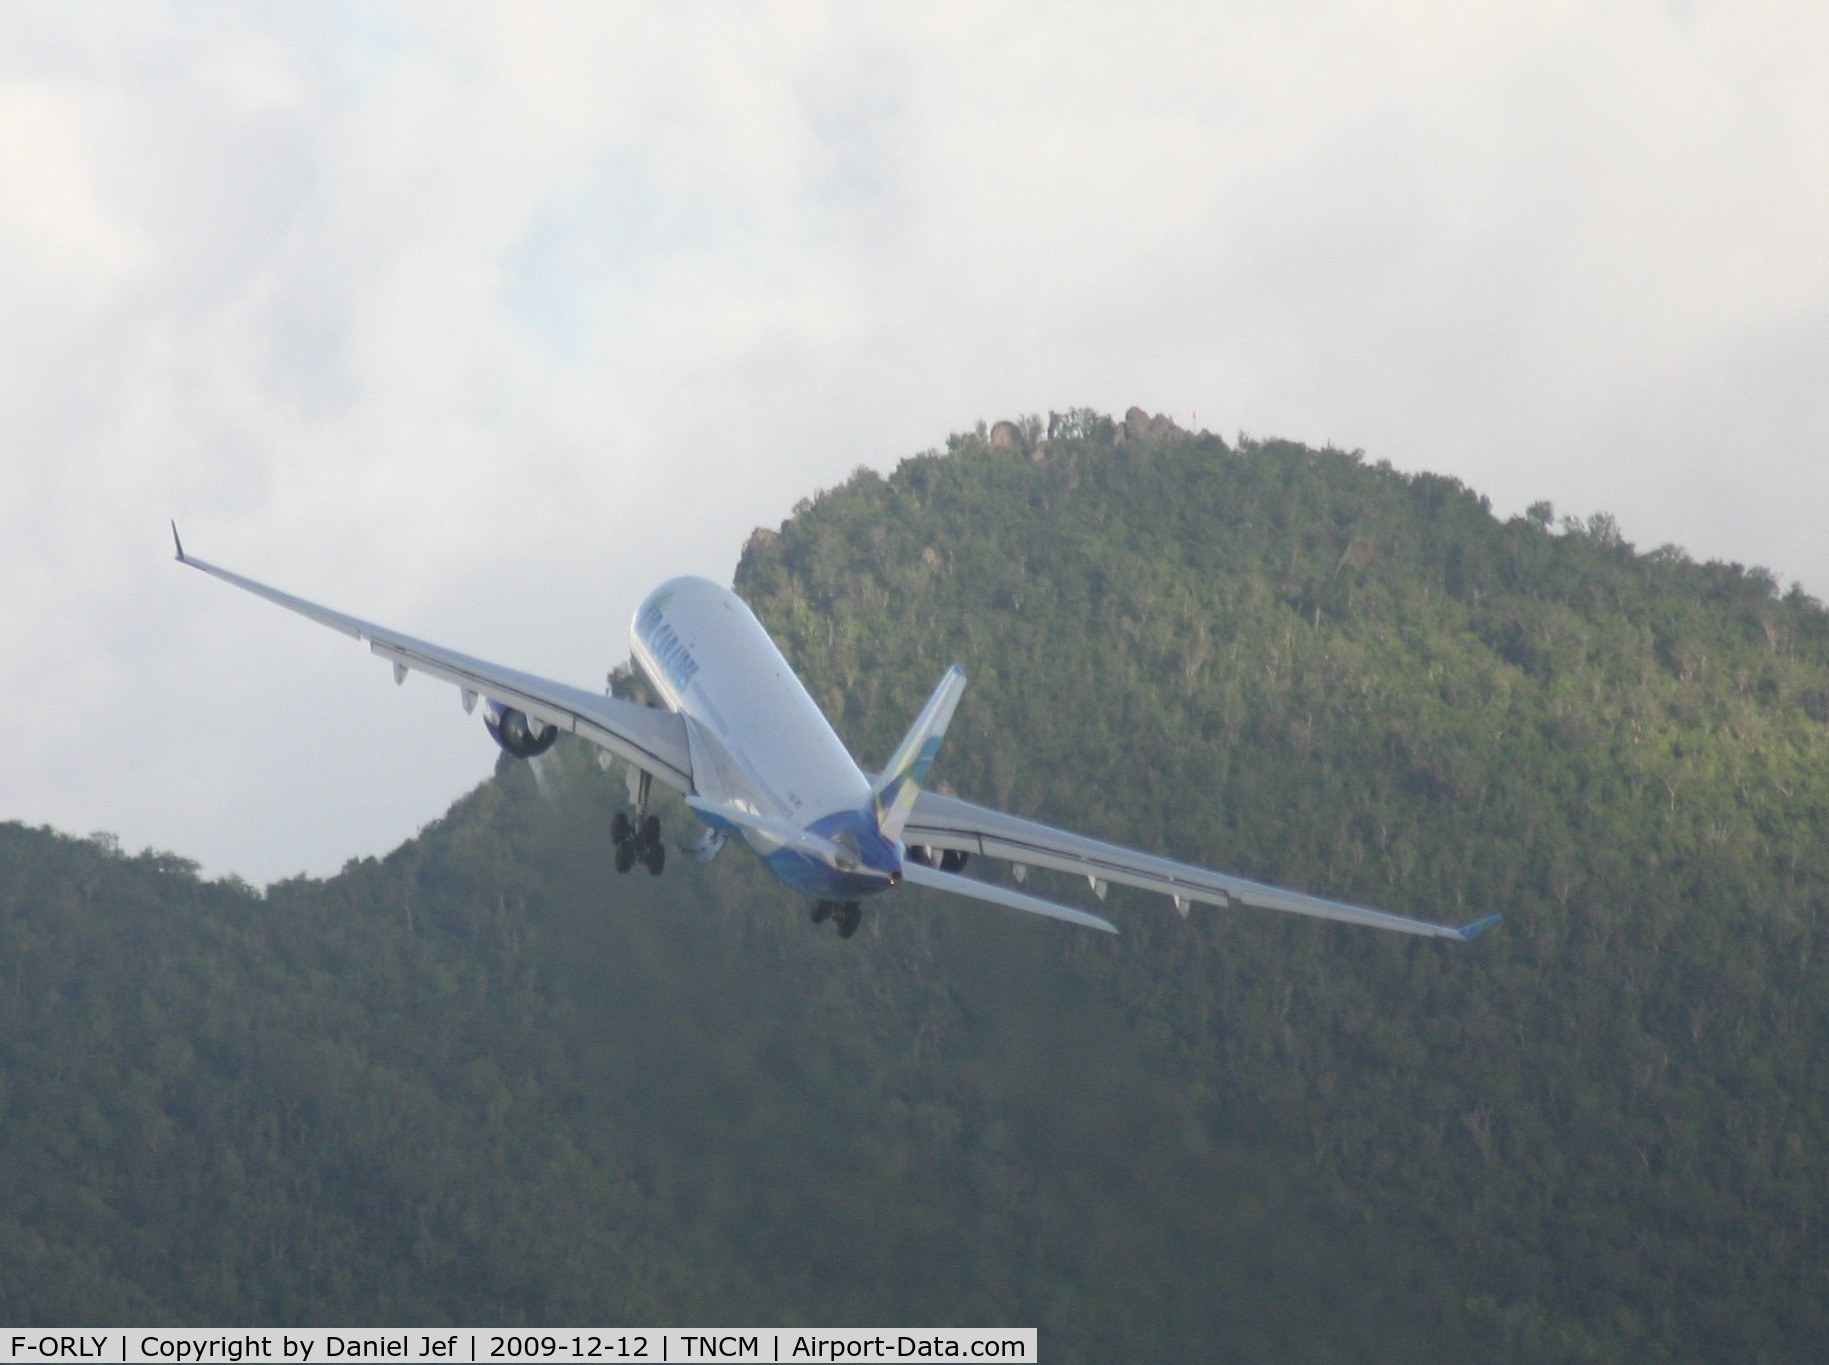 F-ORLY, 2006 Airbus A330-323X C/N 758, Air caraibes clearing the hills on the way out of St Maarten